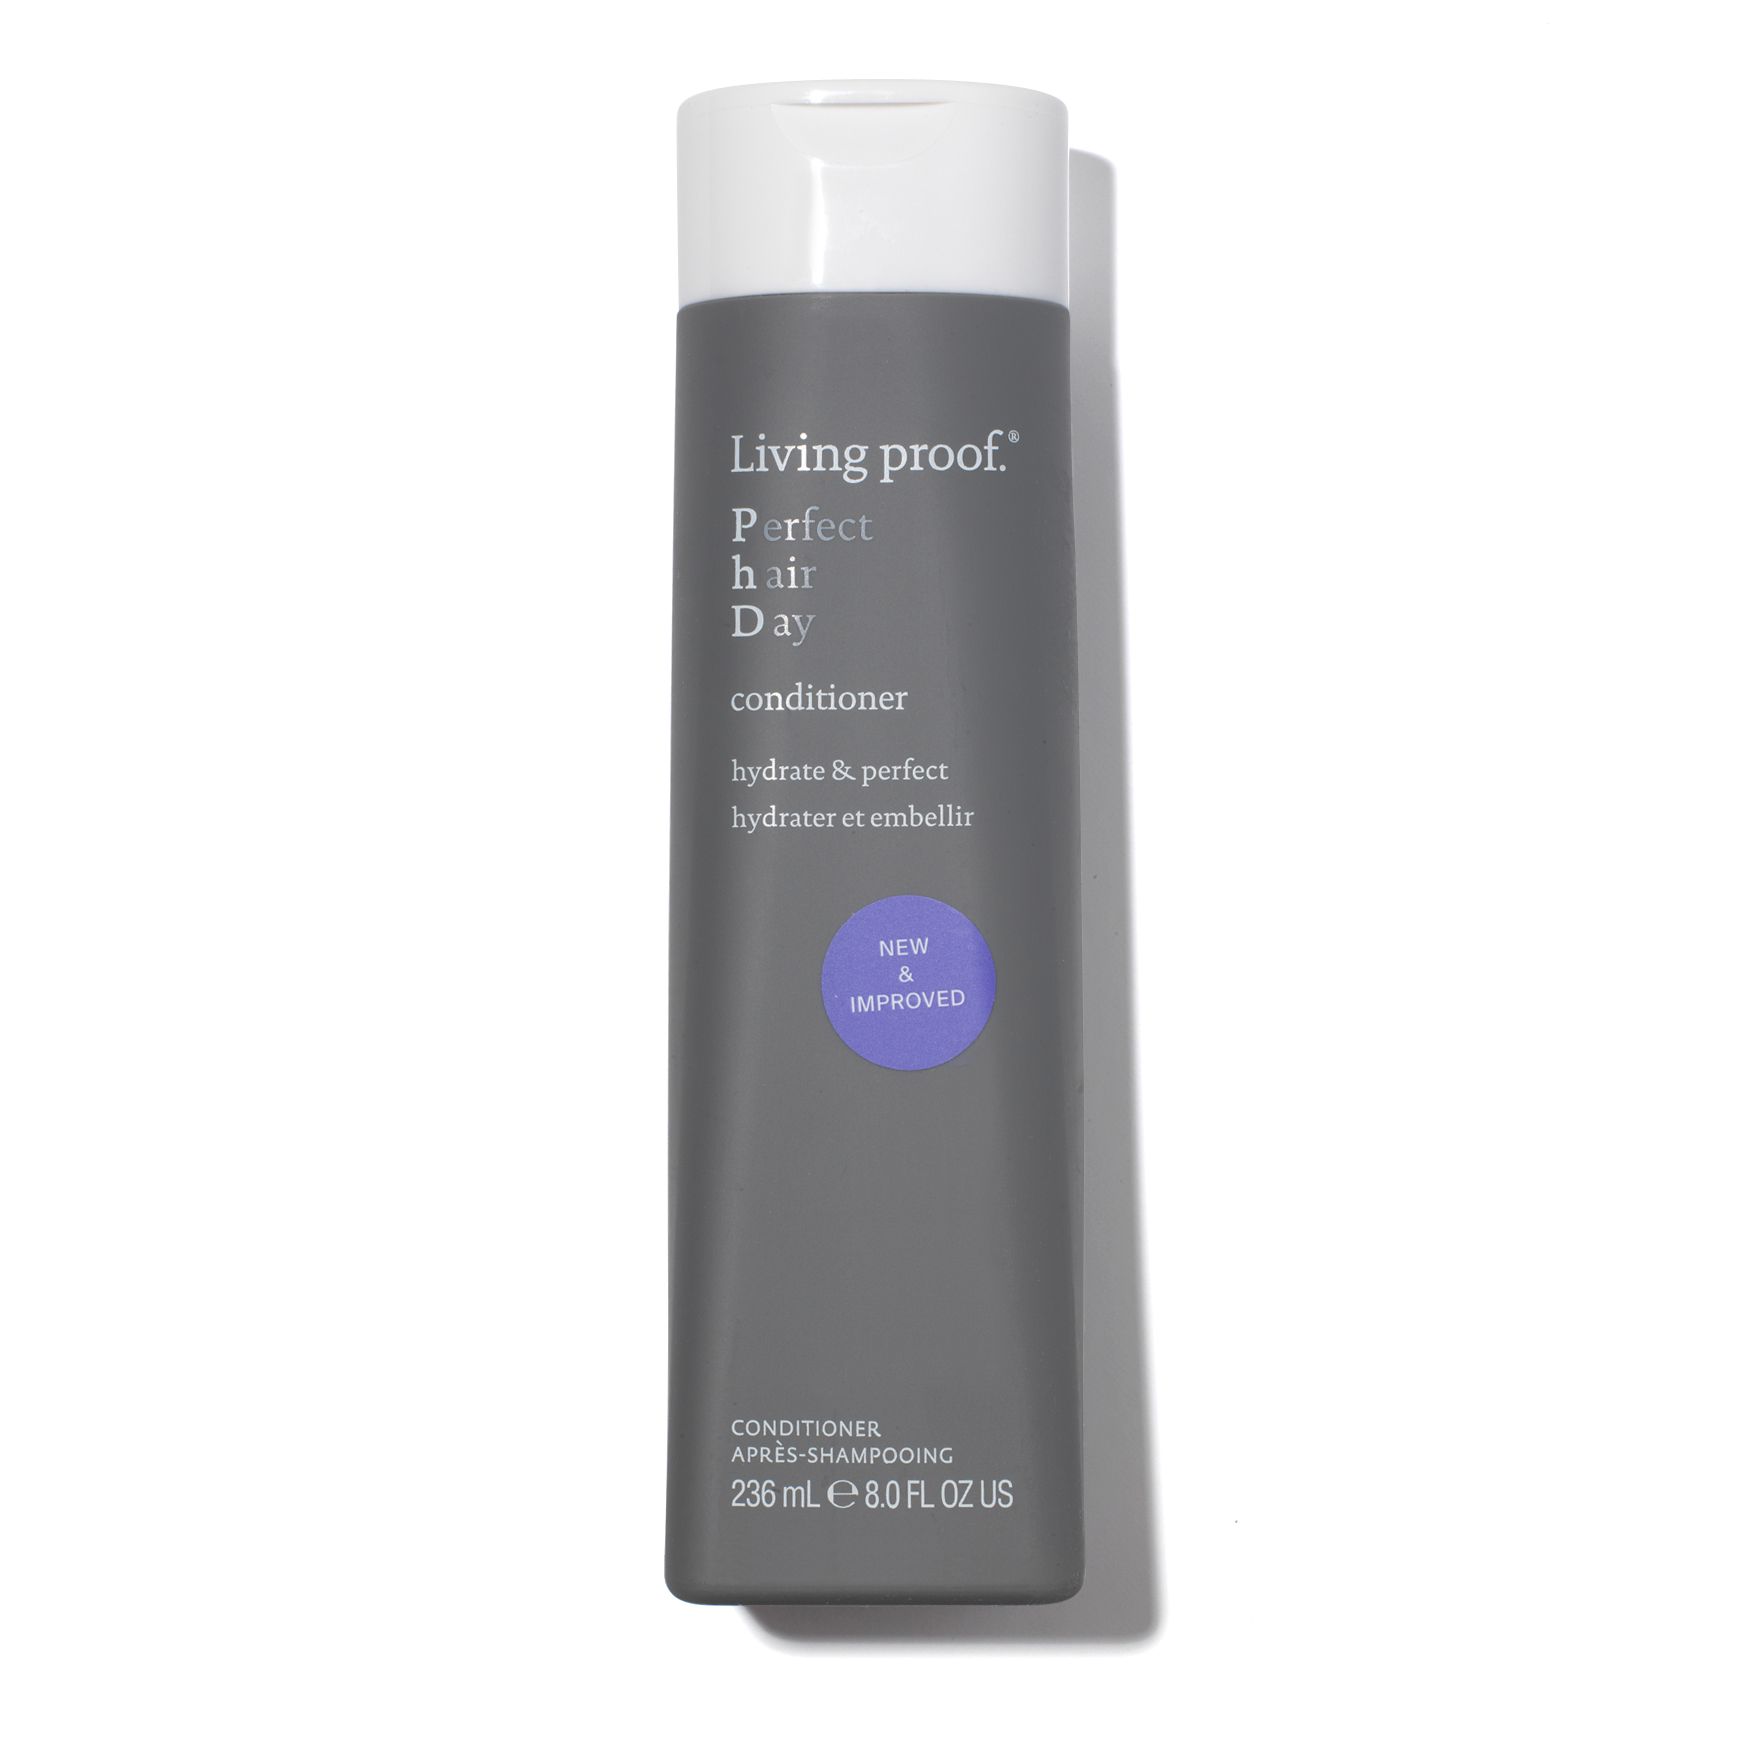 Living Proof Perfect hair Day™ Conditioner | Space NK | Space NK (US)